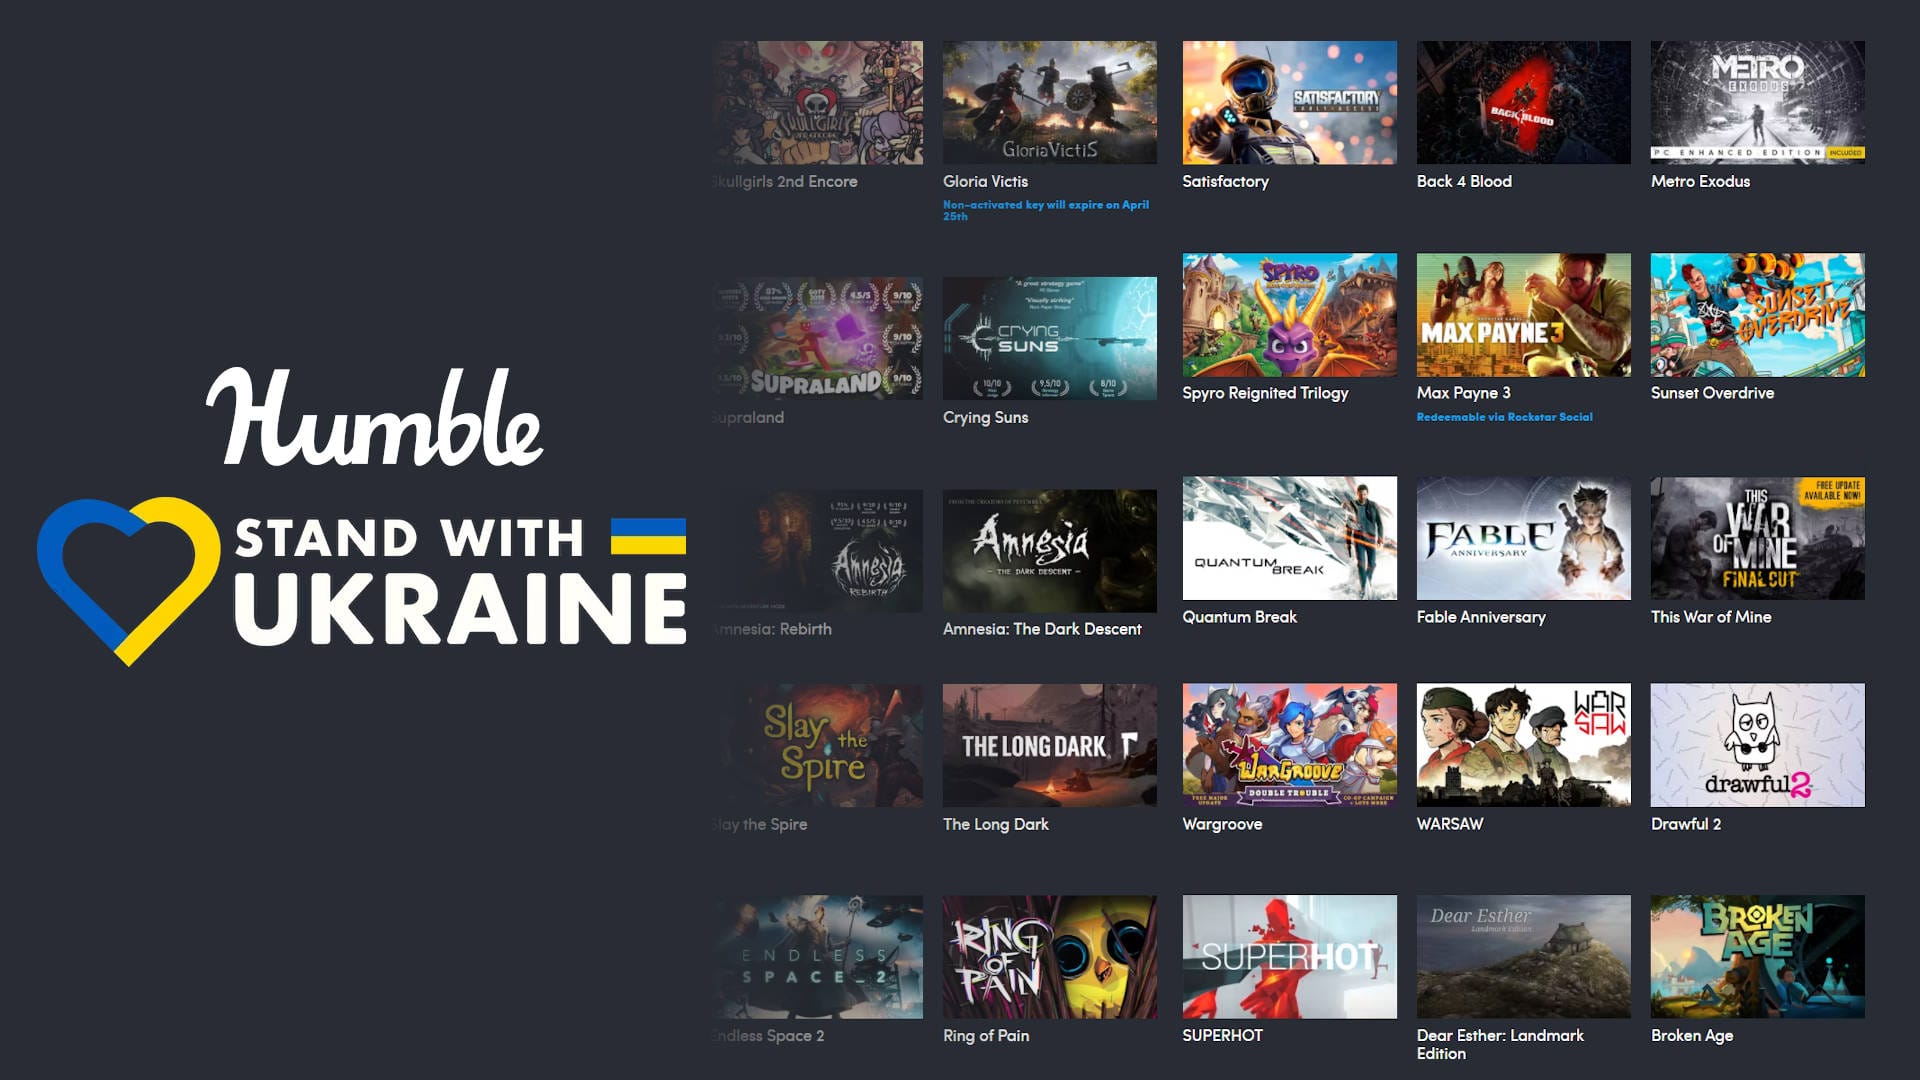 Humble Stand With Ukraine Bundle Has Dozens of Games for Just $40